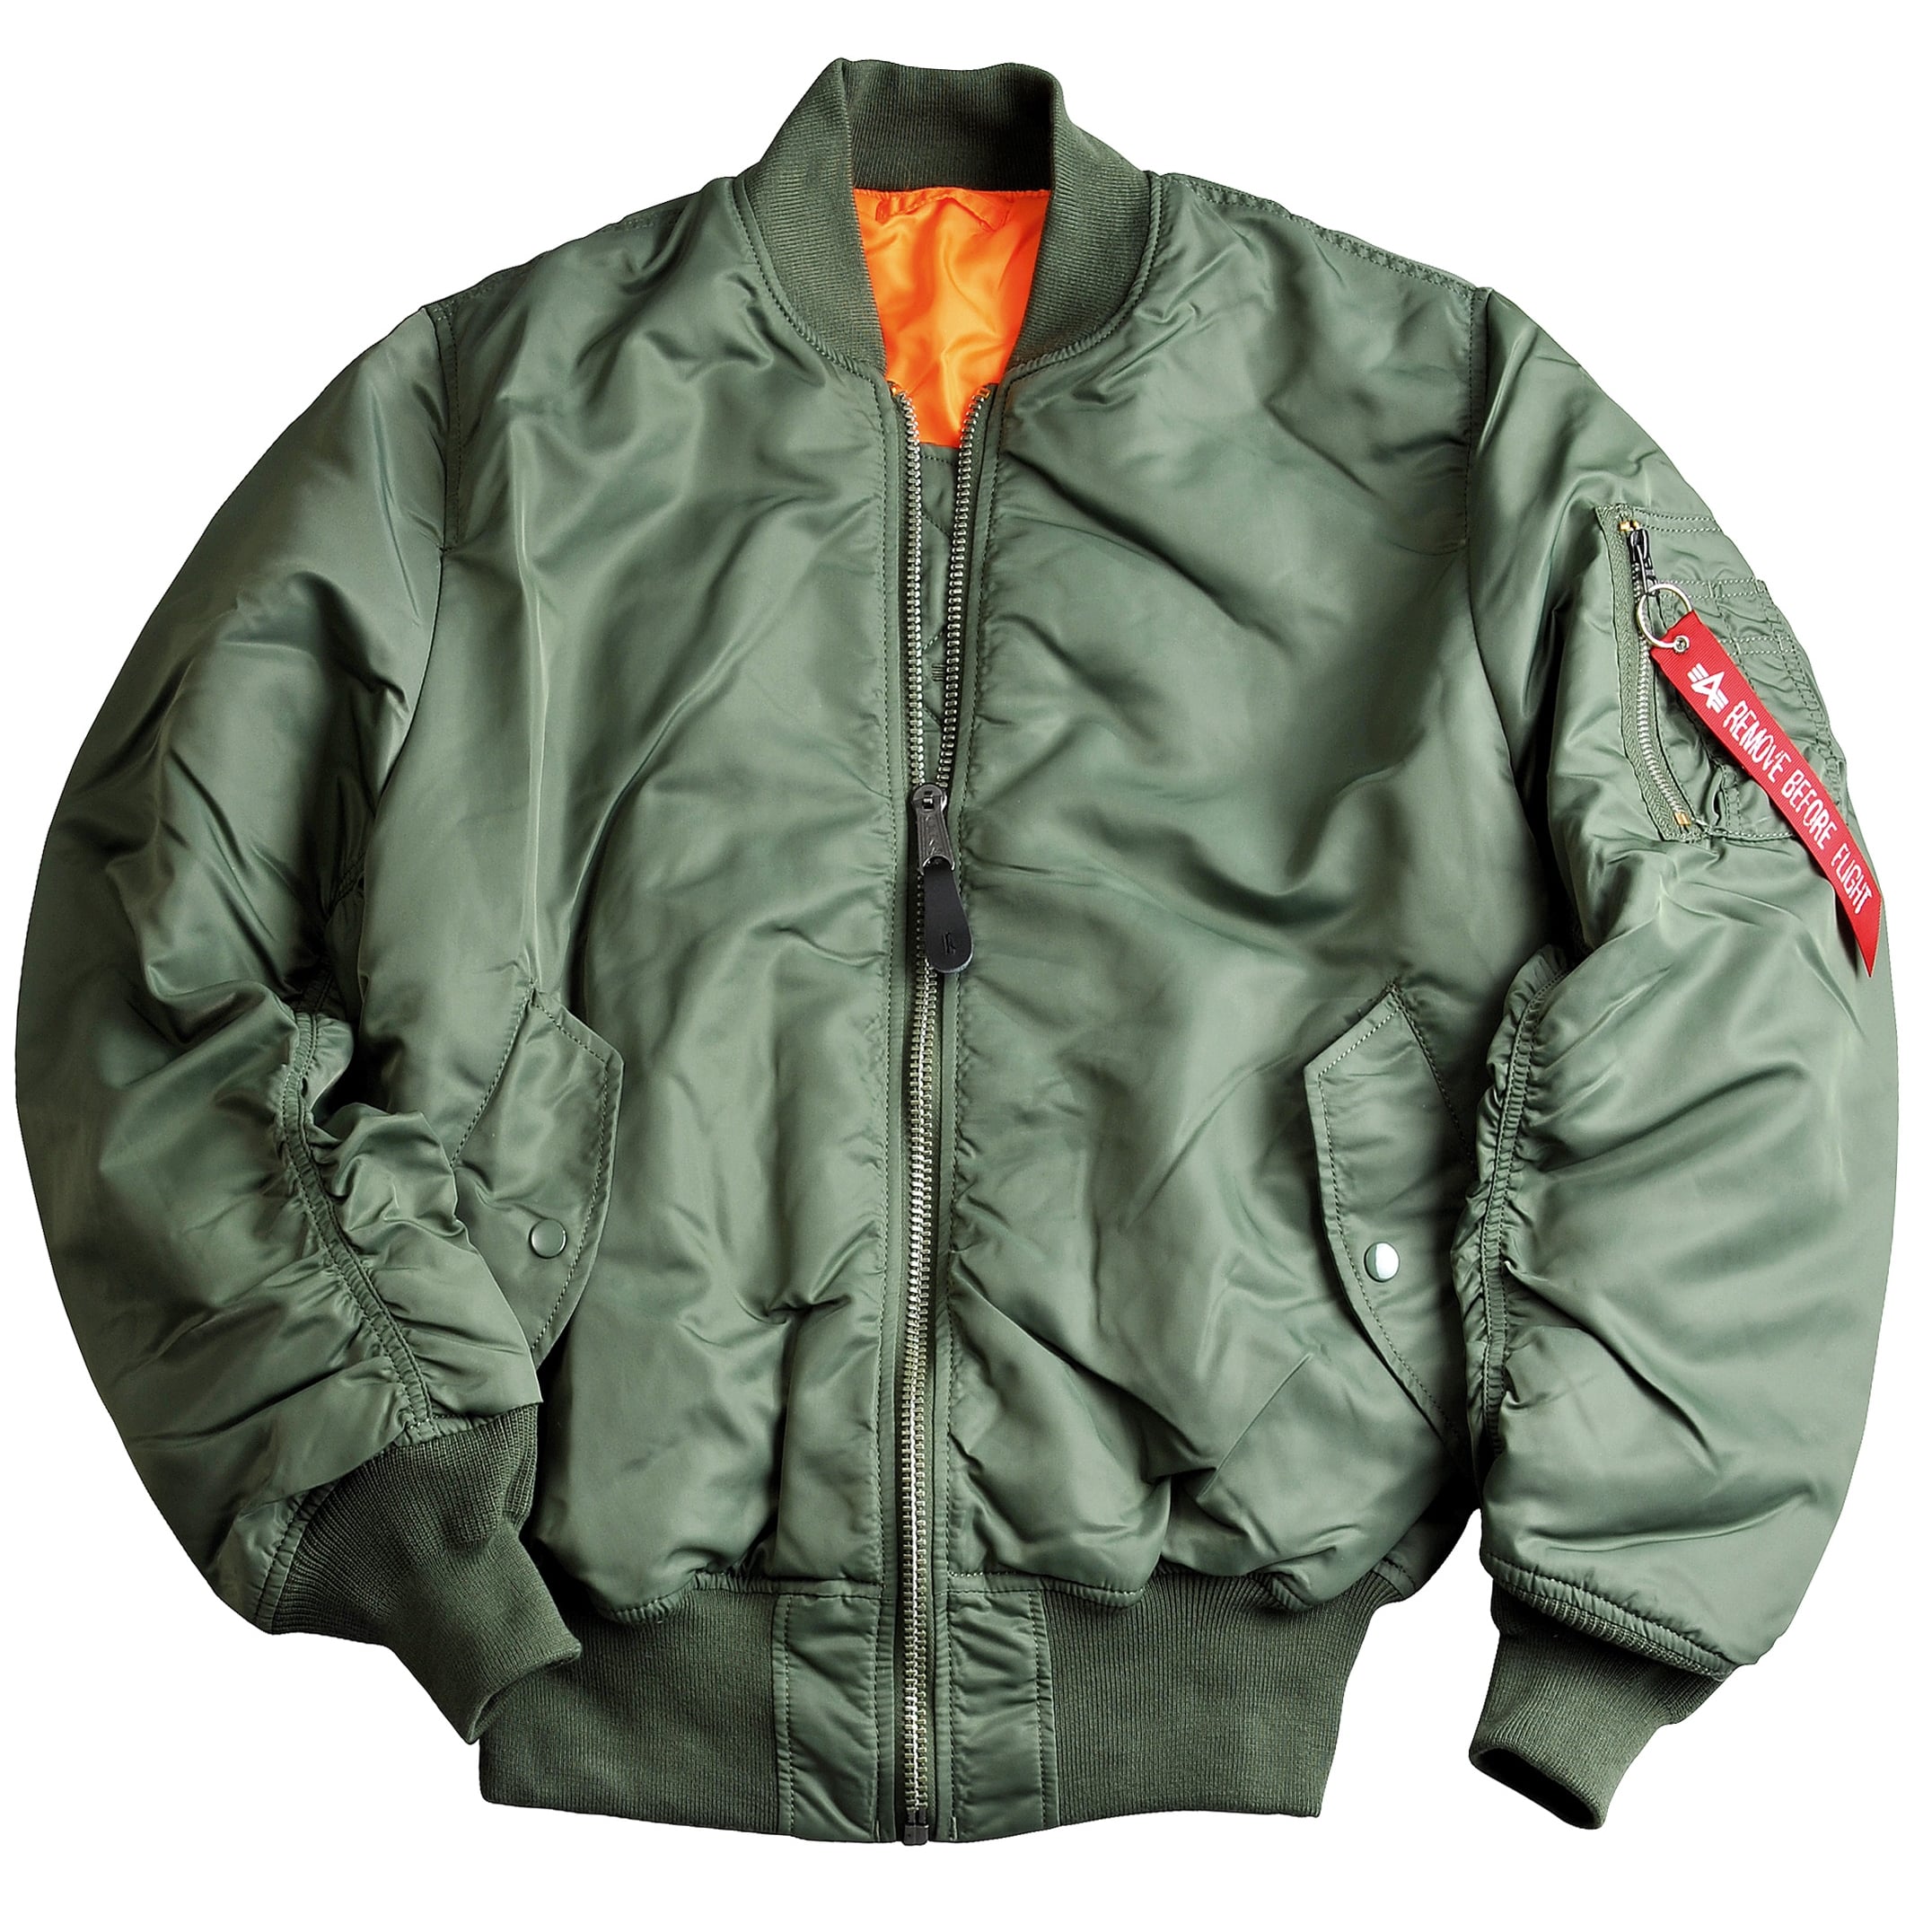 Choose best flight jacket for convenient reasons and best results